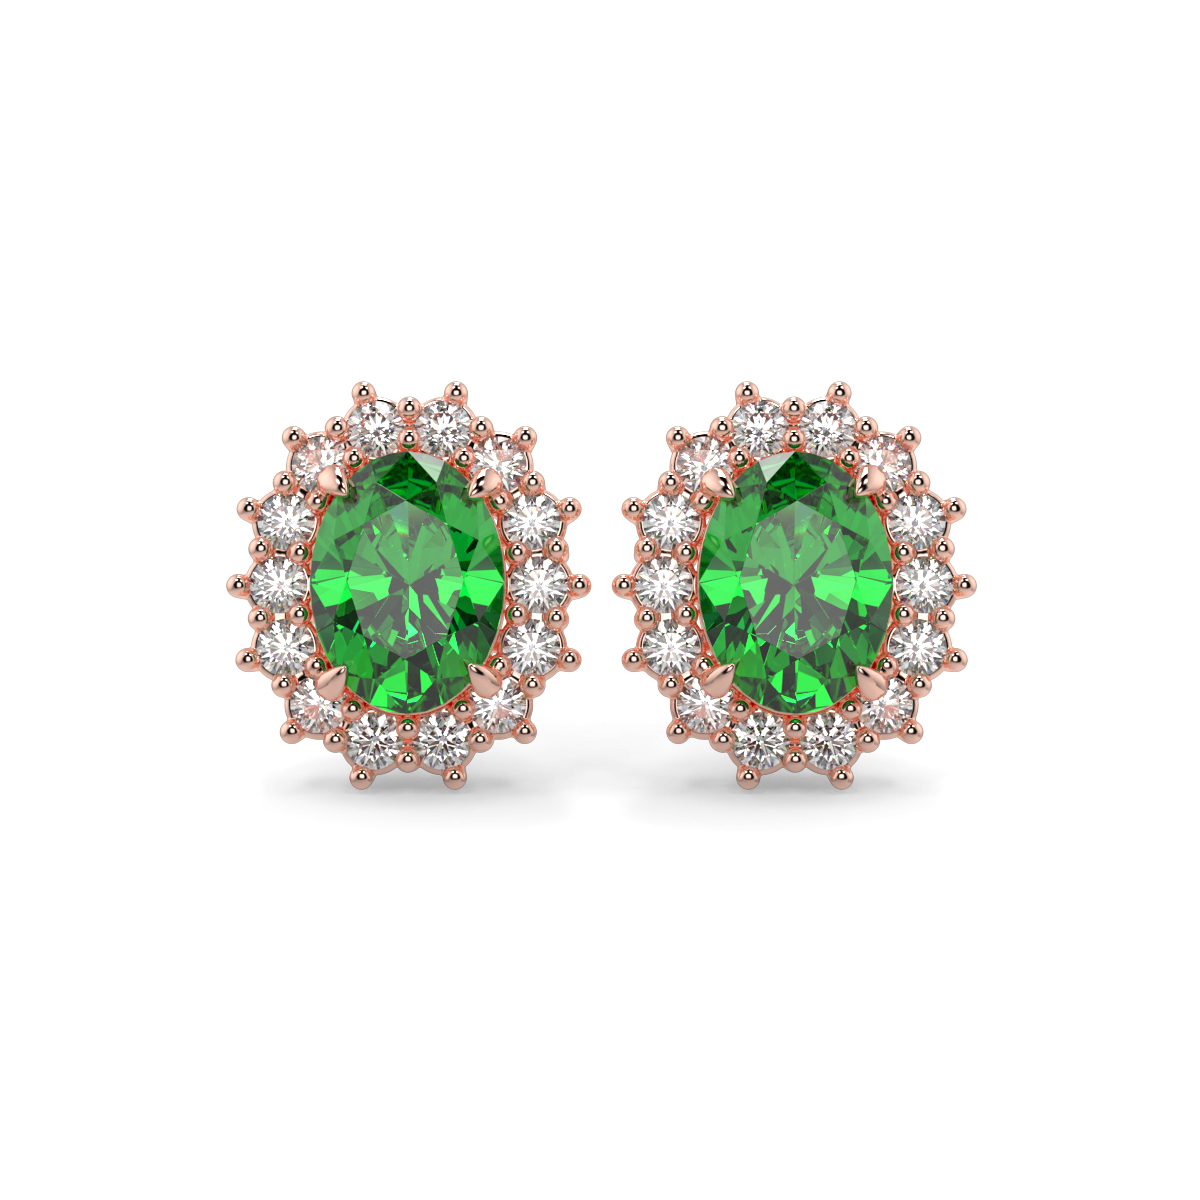 Emerald and Diamond Lady Diana Halo Earrings Rose Gold - CAMILLE